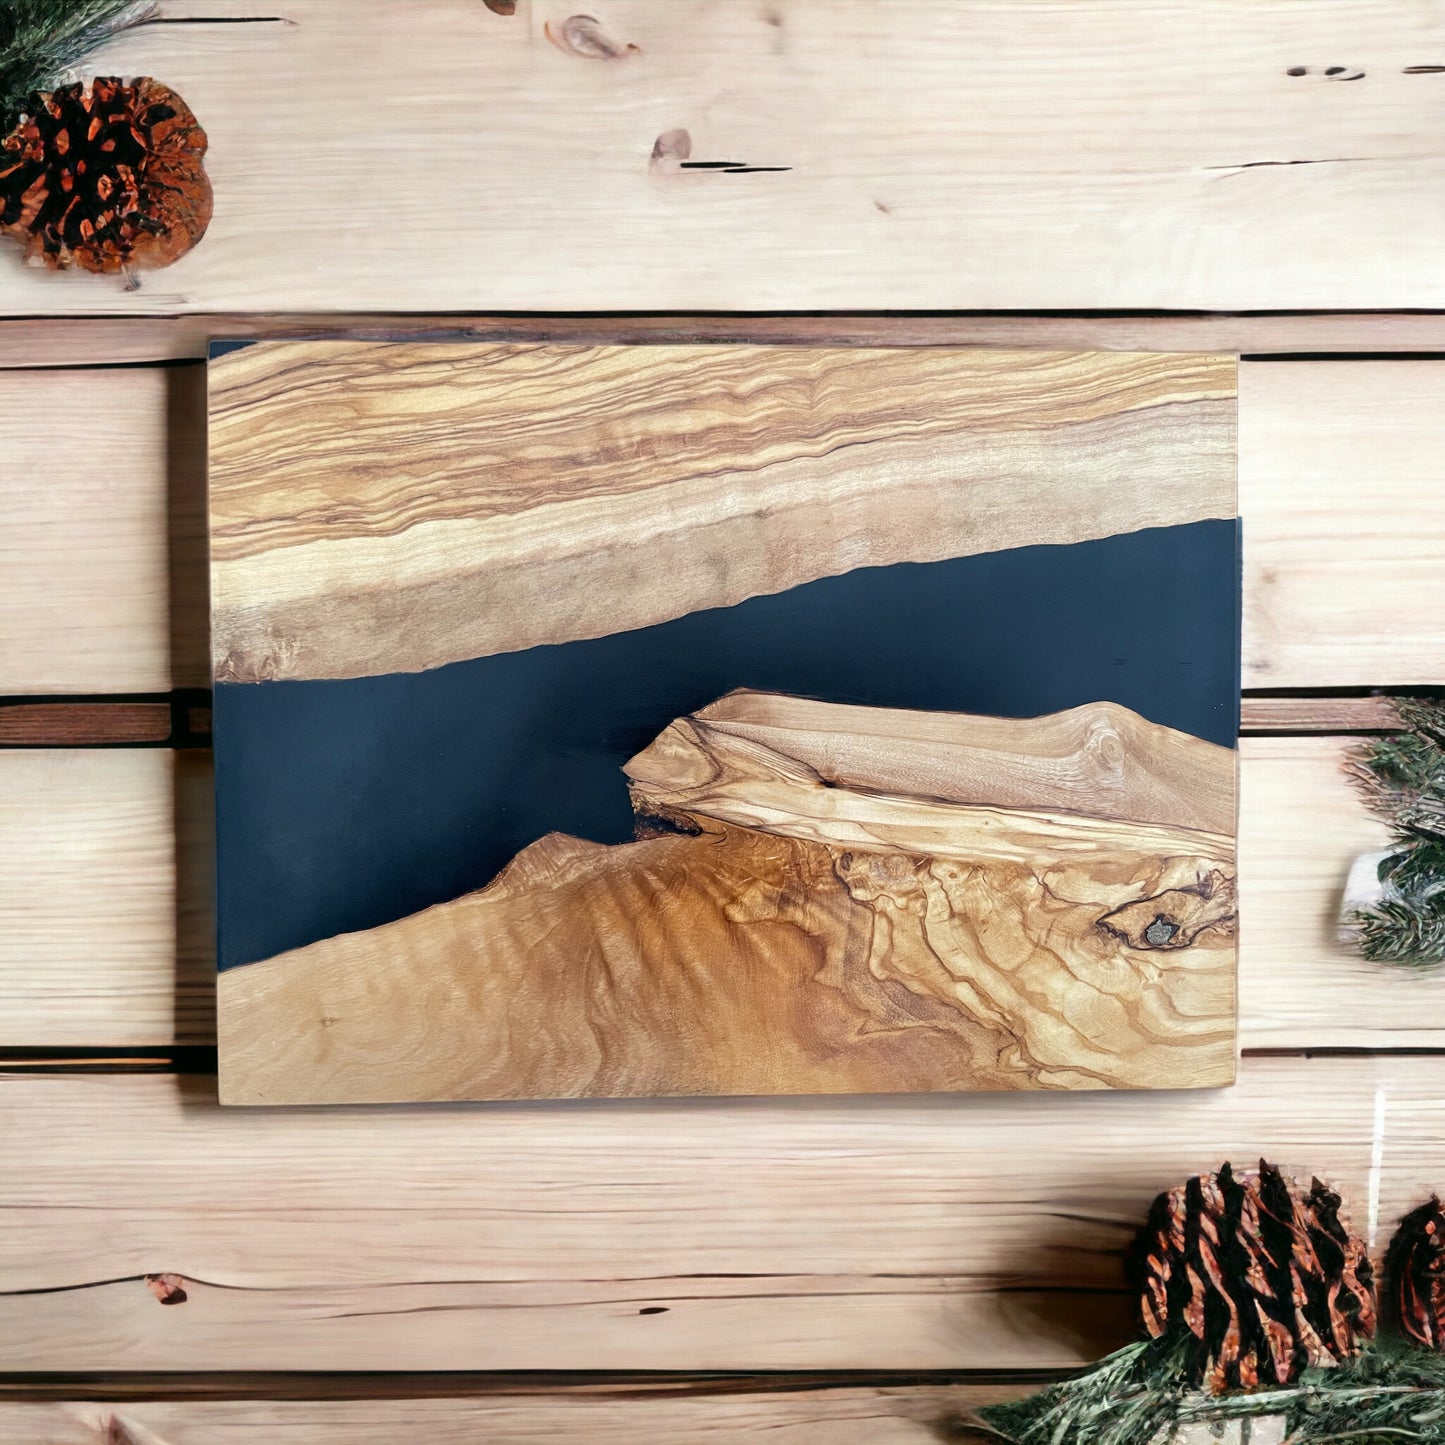 Personalized Artisanal Impressions: Wood & Resin Cheese Board Collection - SMALL